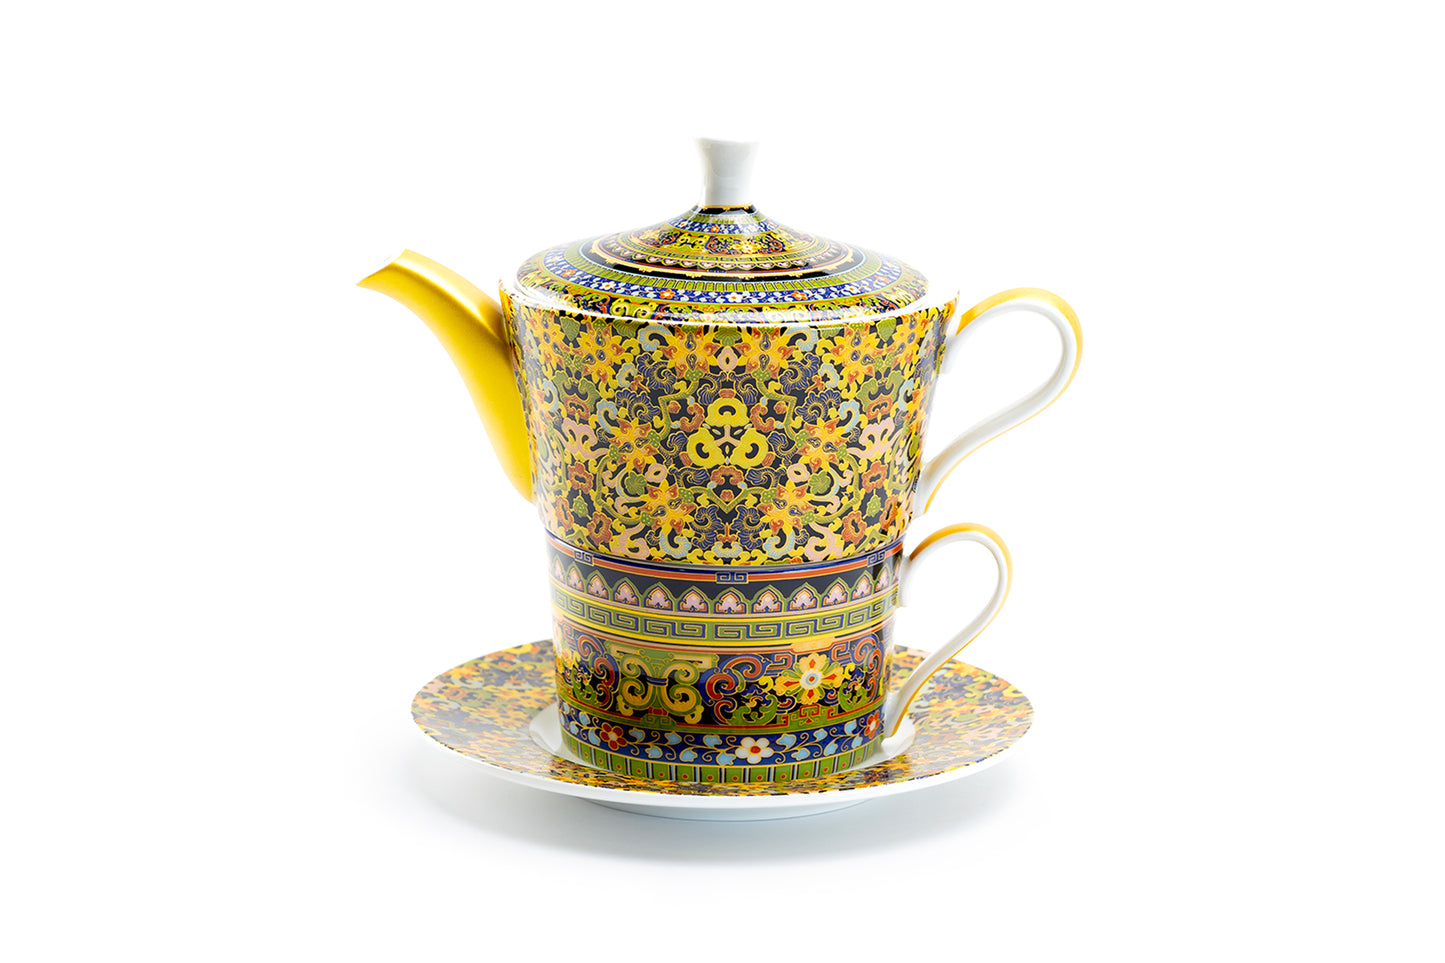 Stechol Gracie China Golden Moroccan Fine Porcelain Tea For One